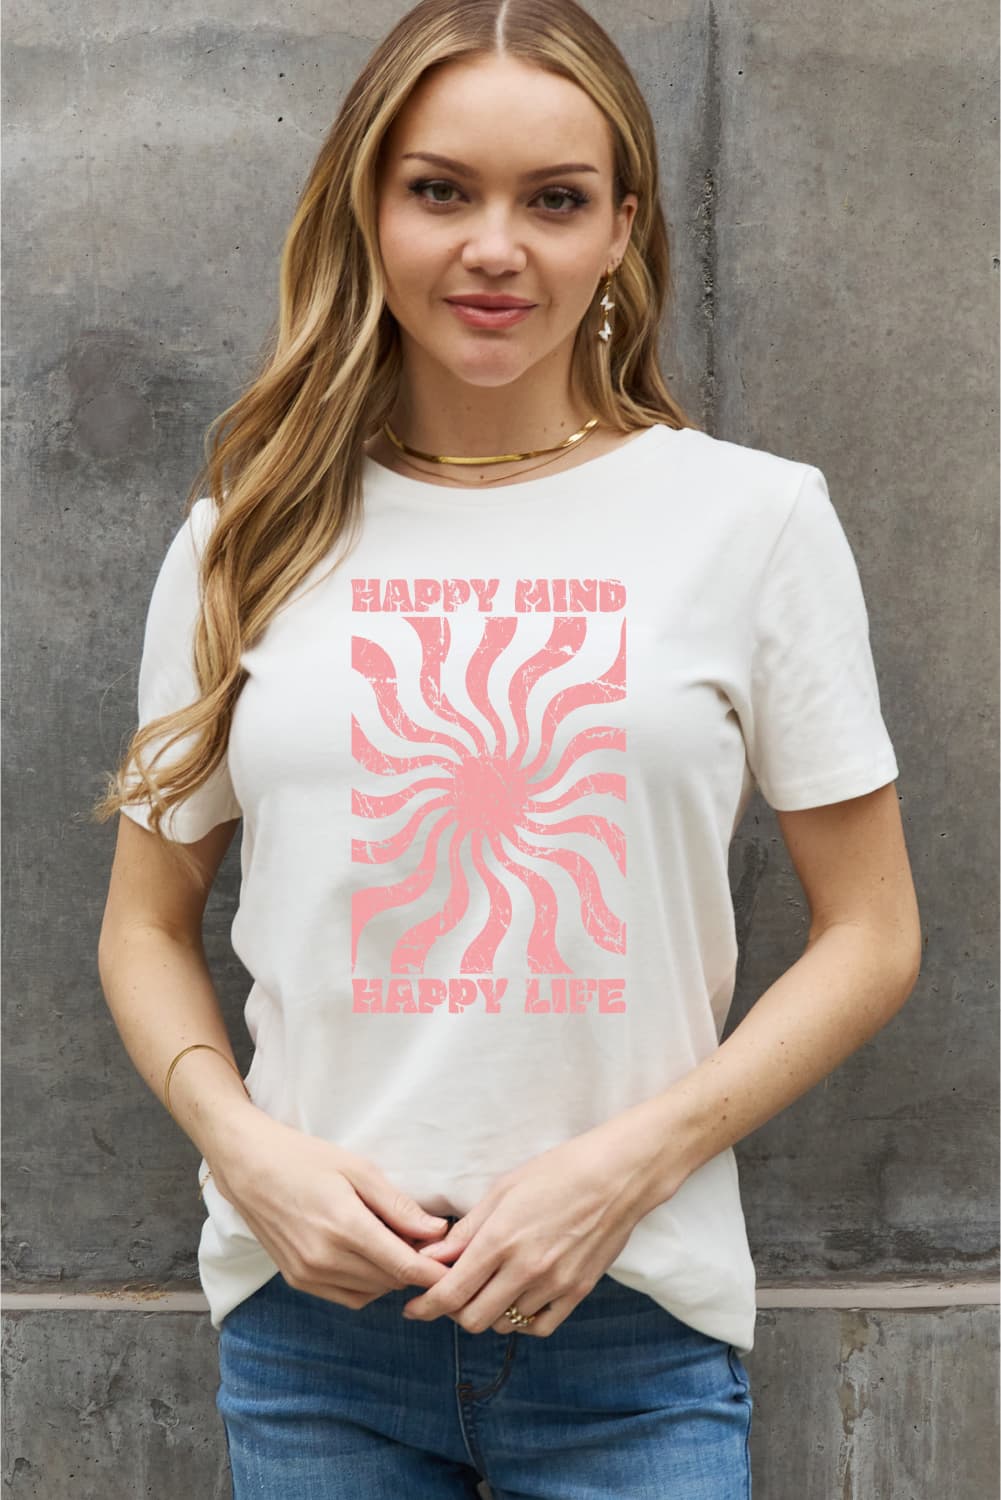 Dim Gray Simply Love Full Size HAPPY MIND HAPPY LIFE Graphic Cotton Tee Sentient Beauty Fashions Apparel &amp; Accessories